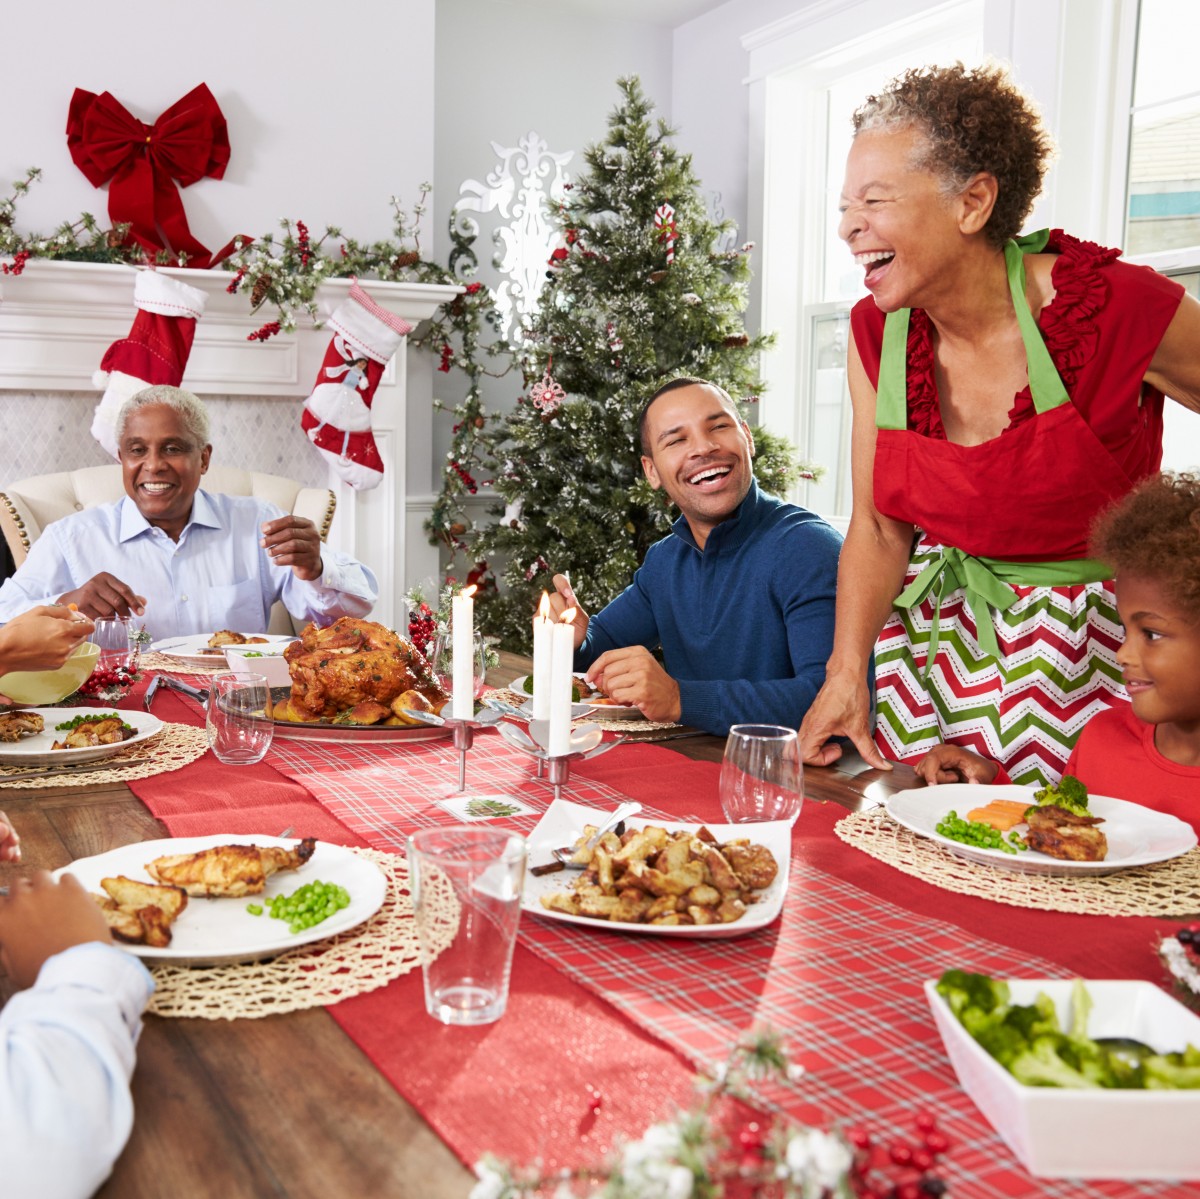 How You Can Make the Holidays Senior Friendly